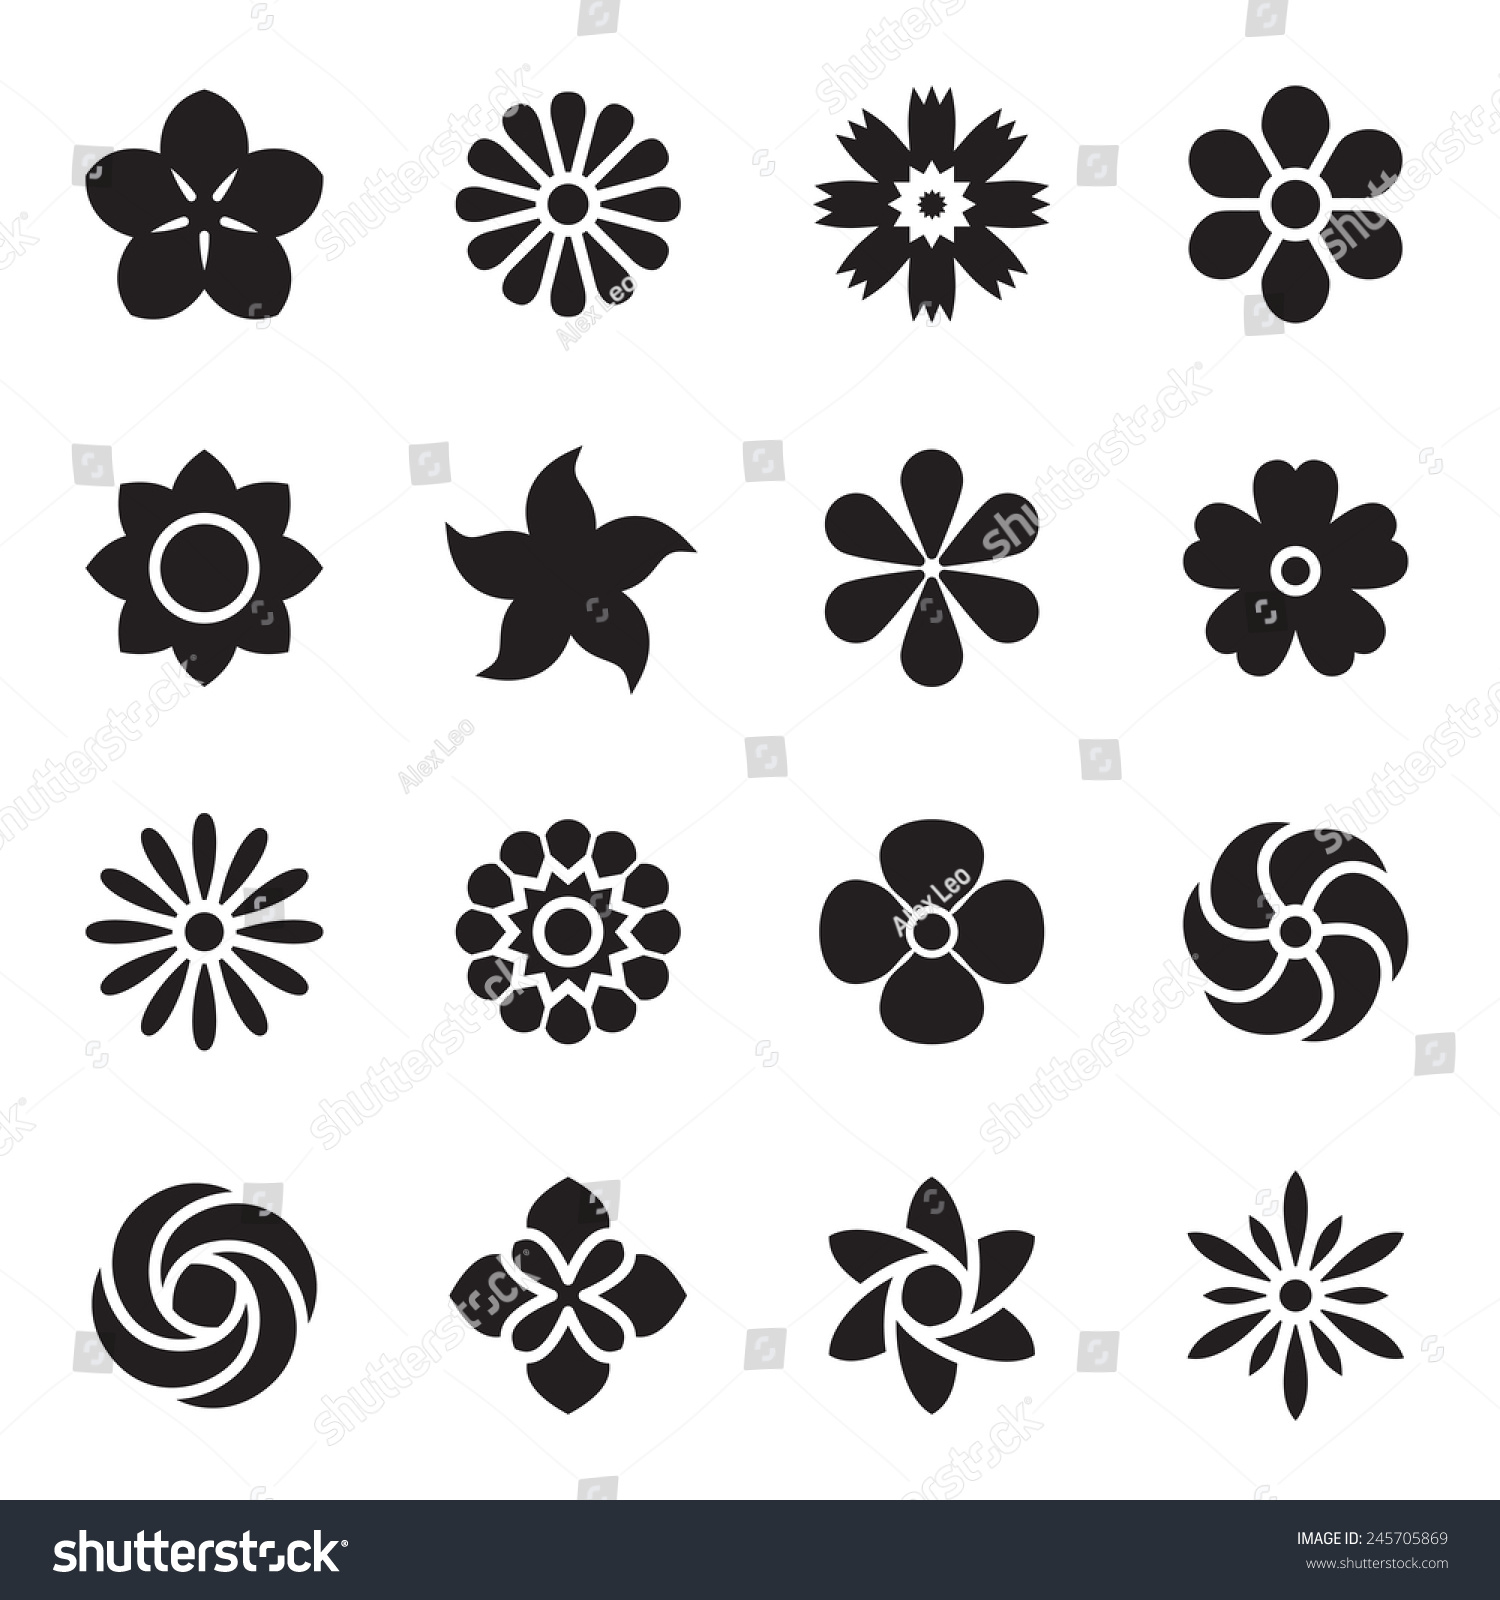 Flower Icons Vector Illustration Stock Vector (Royalty Free) 245705869 ...